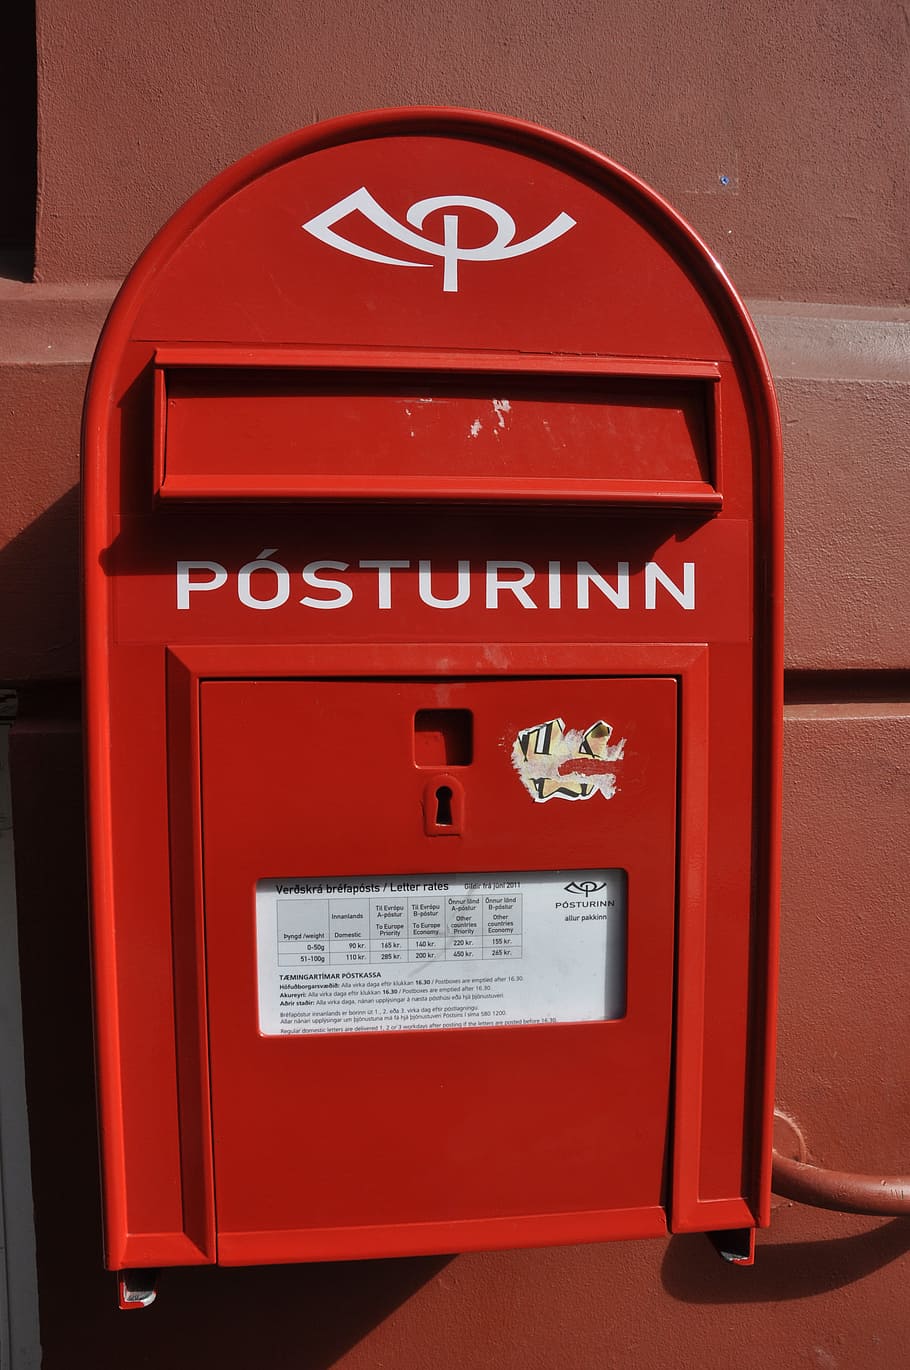 Mailbox, Post, Postal, communication, delivery, service, postbox